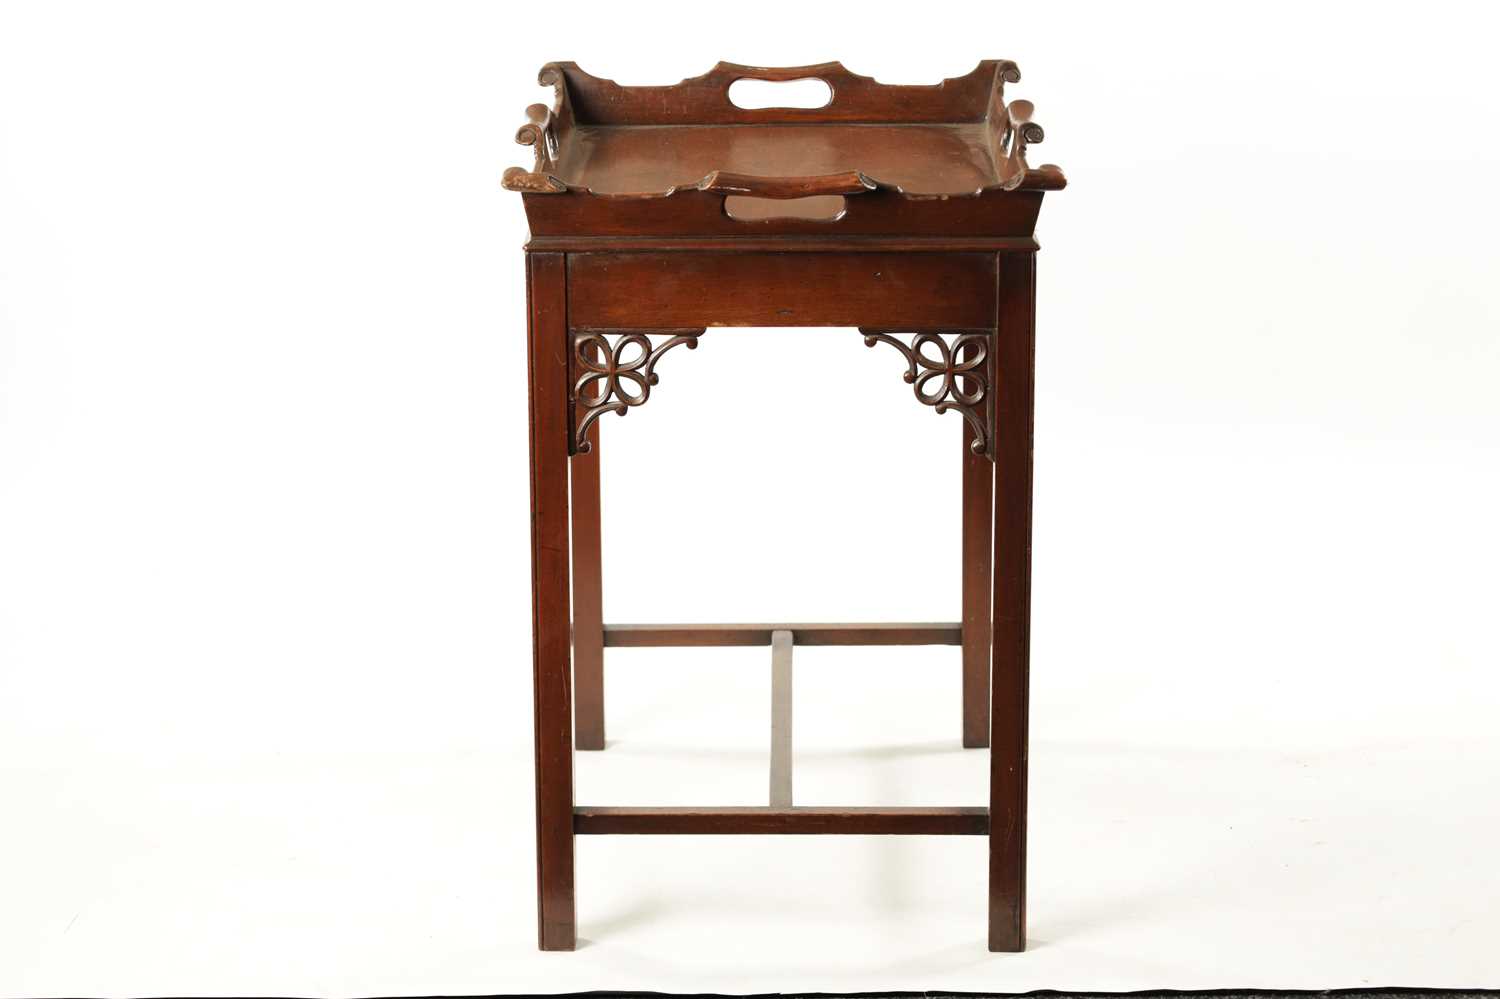 A REPRODUCTION CHIPPENDALE STYLE MAHOGANY TRAY ON STAND - Image 6 of 6